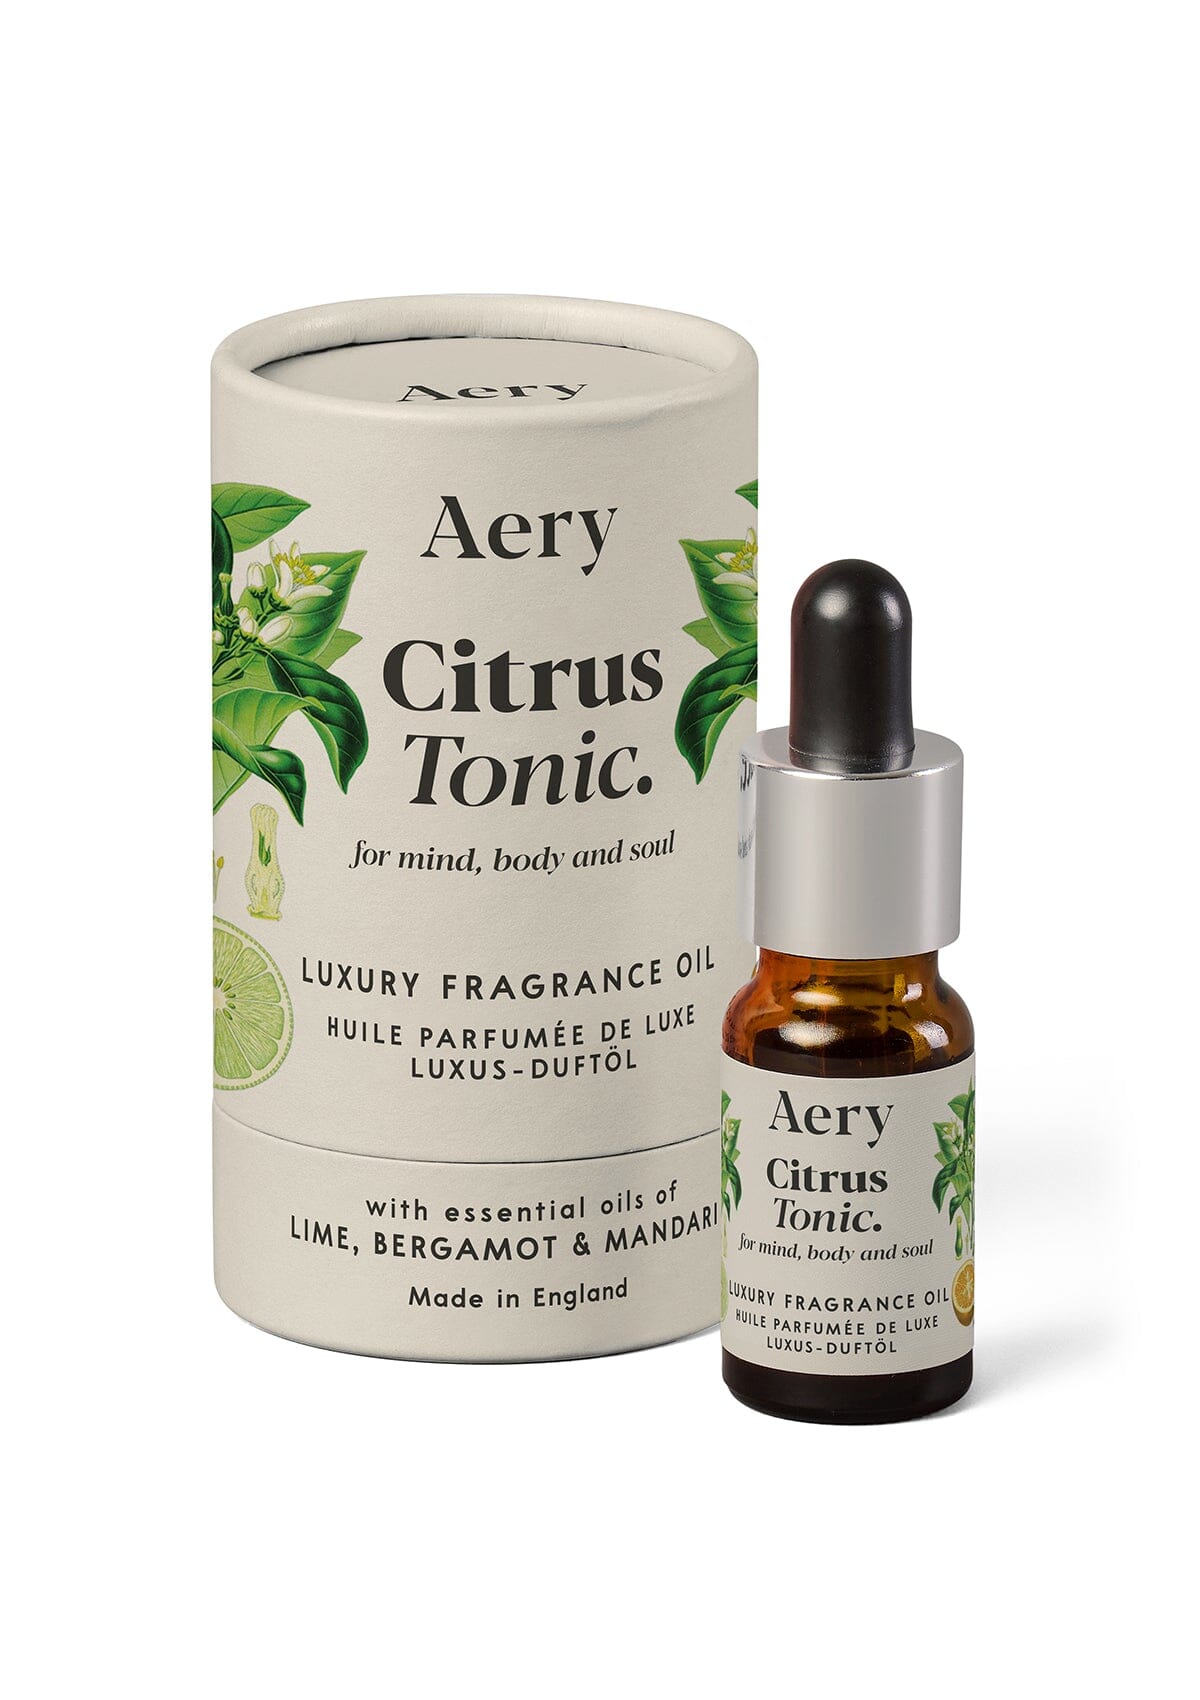 Cream Citrus Tonic fragrance oil displayed next to product packaging by Aery on white background 